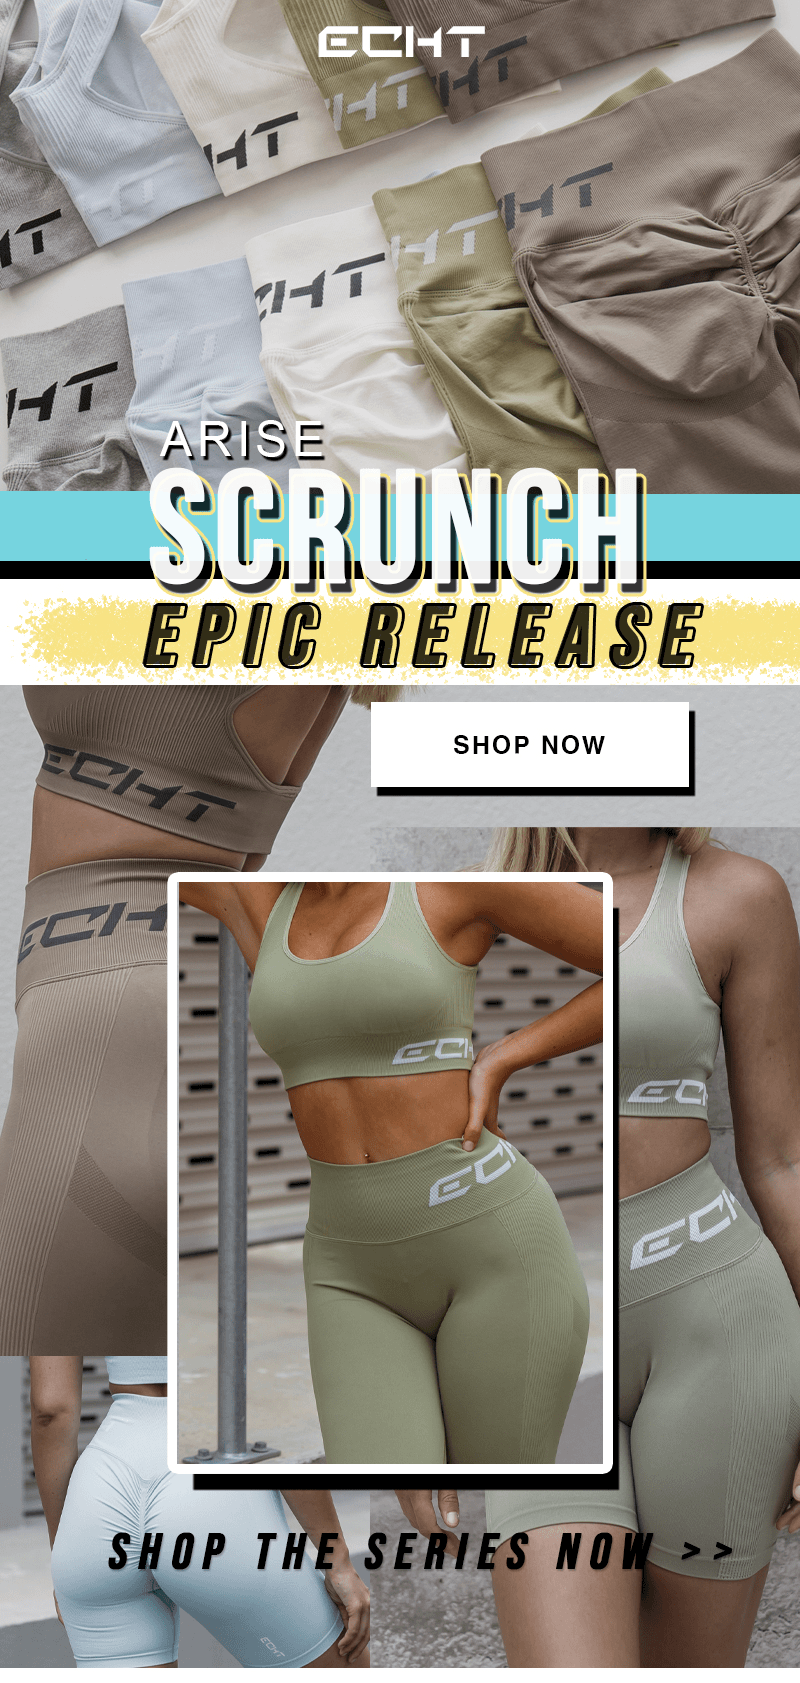 Echt - They're here. The Flare Leggings just dropped. Shop